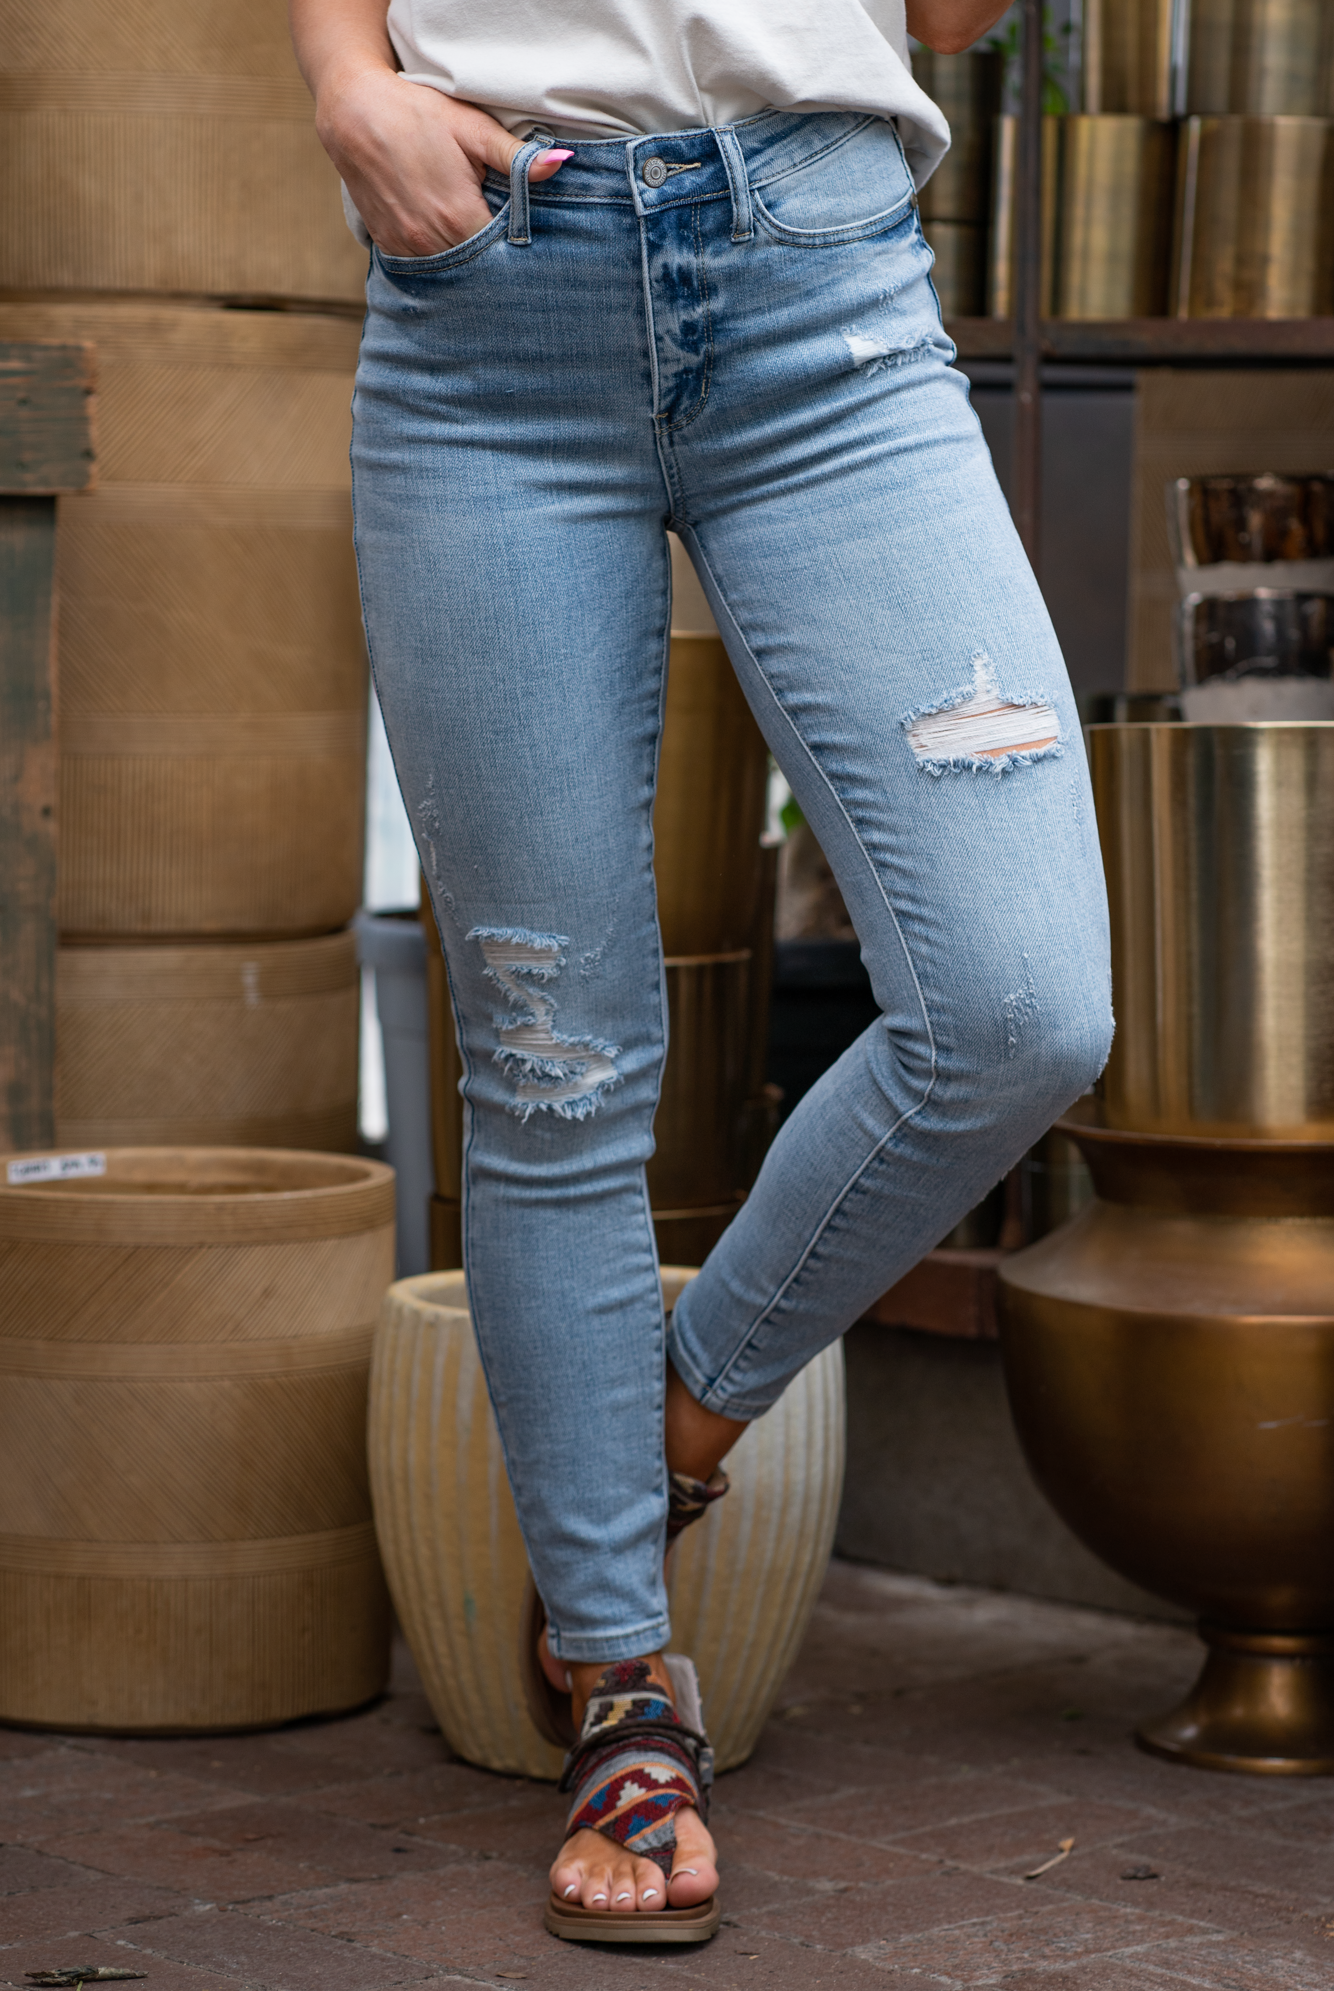 Judy Blue  Don't be afraid to wear high-waisted jeans, especially these skinny fits! With a light blue wash and distressed look,  these will be new favorites!   Color: Light Blue    Cut: Skinny, 28.5" Inseam* Rise: High Rise, 10.5" Front Rise* Machine Wash Separately In Cold Water Stitching: Classic  Material: 93% COTTON,6% POLYESTER,1% SPANDEX Fly: Zipper Style #: JB82330-JS-PL , 82230-JS-PL